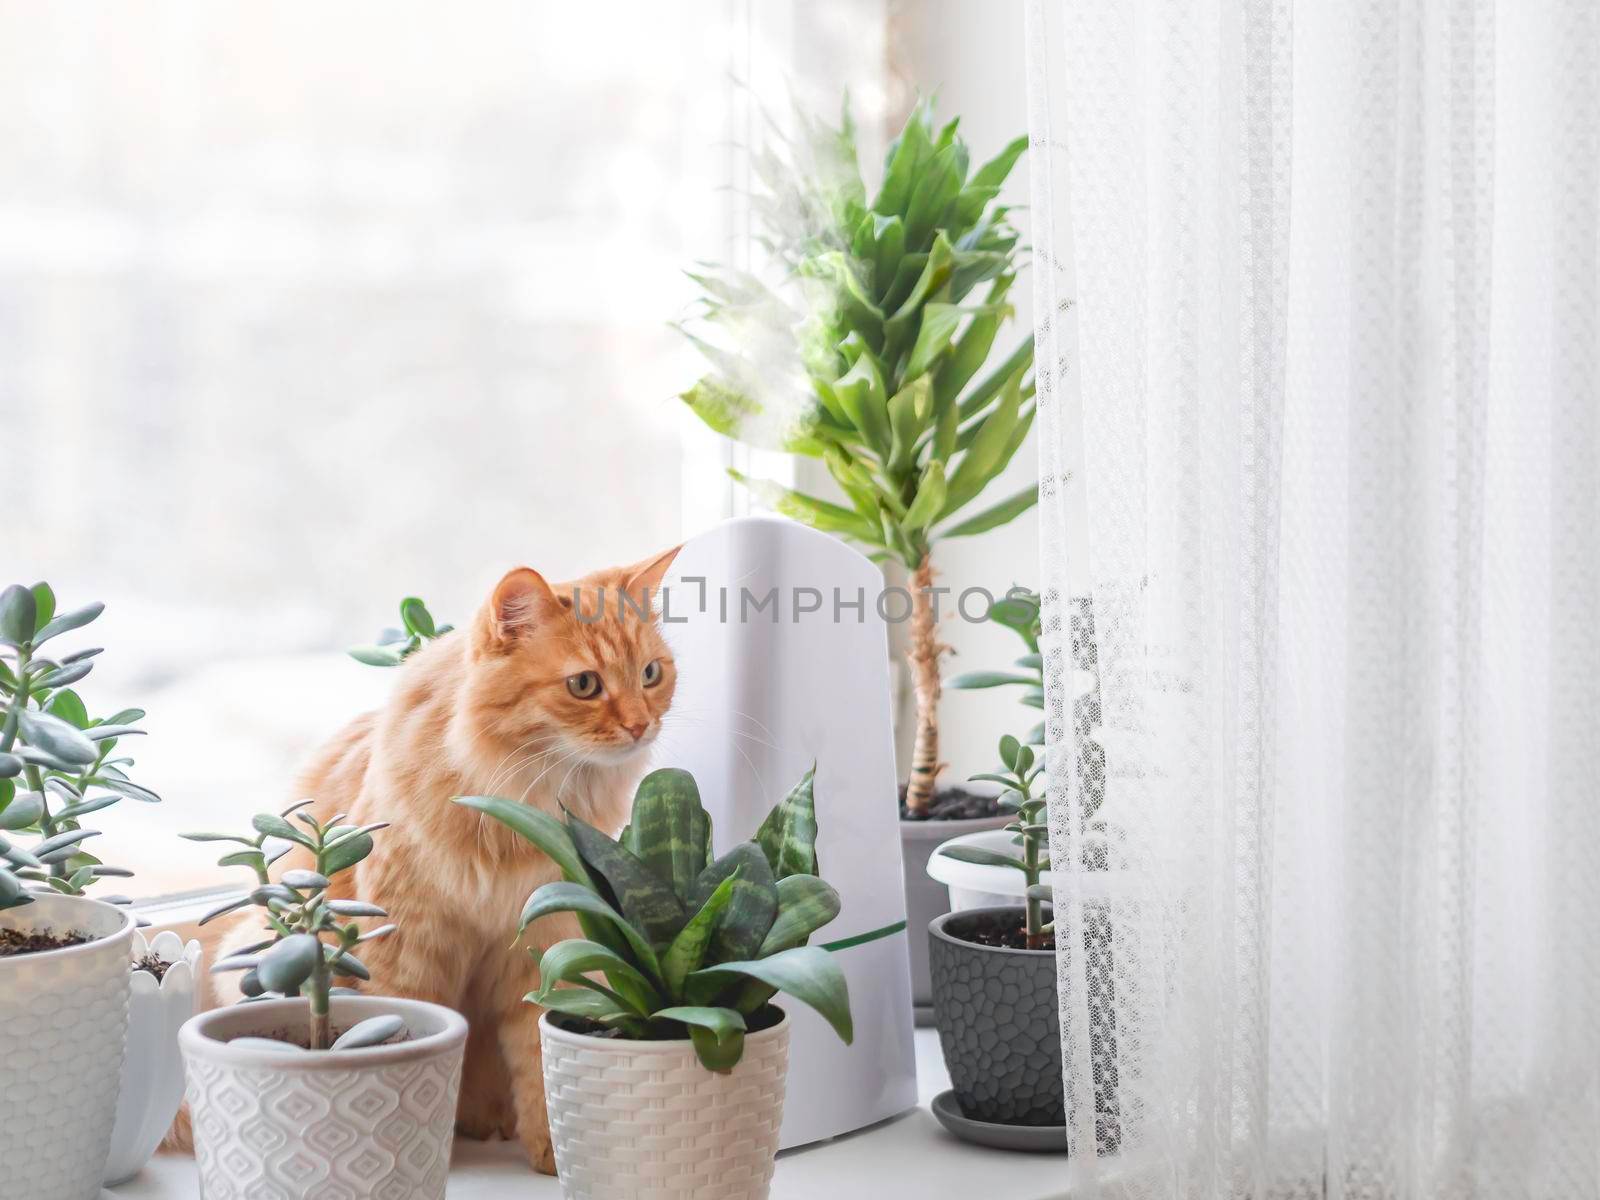 Ultrasonic humidifier among houseplants. Ginger cat among flower pots with succulent plants on windowsill. Water steam moisturizes dry air at home. Electric device for comfort atmosphere. by aksenovko